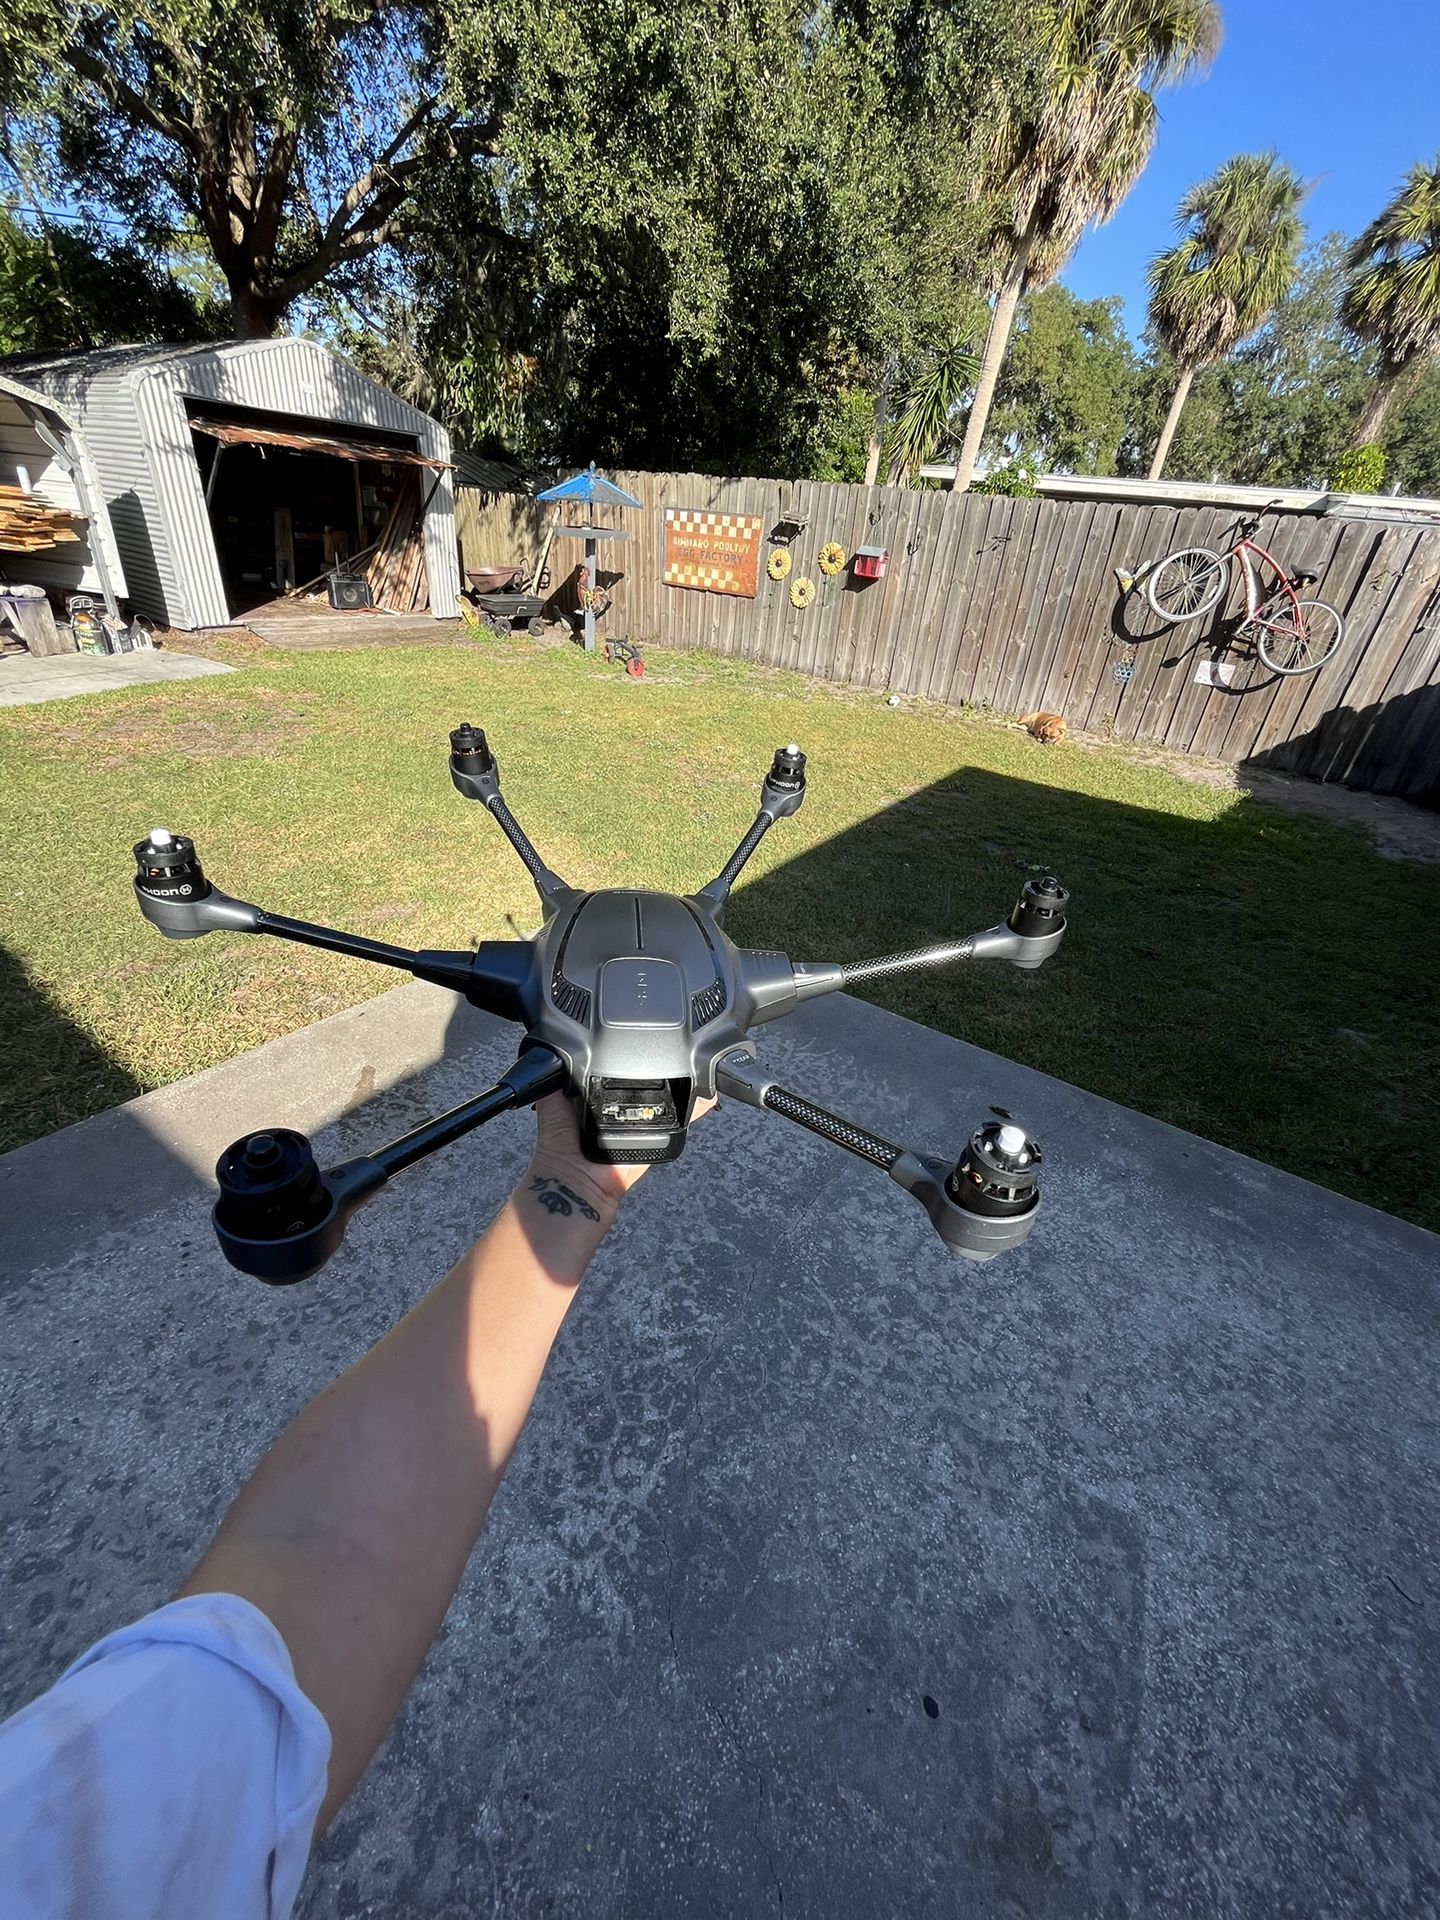 Yuneec Tyhpoon H Drone